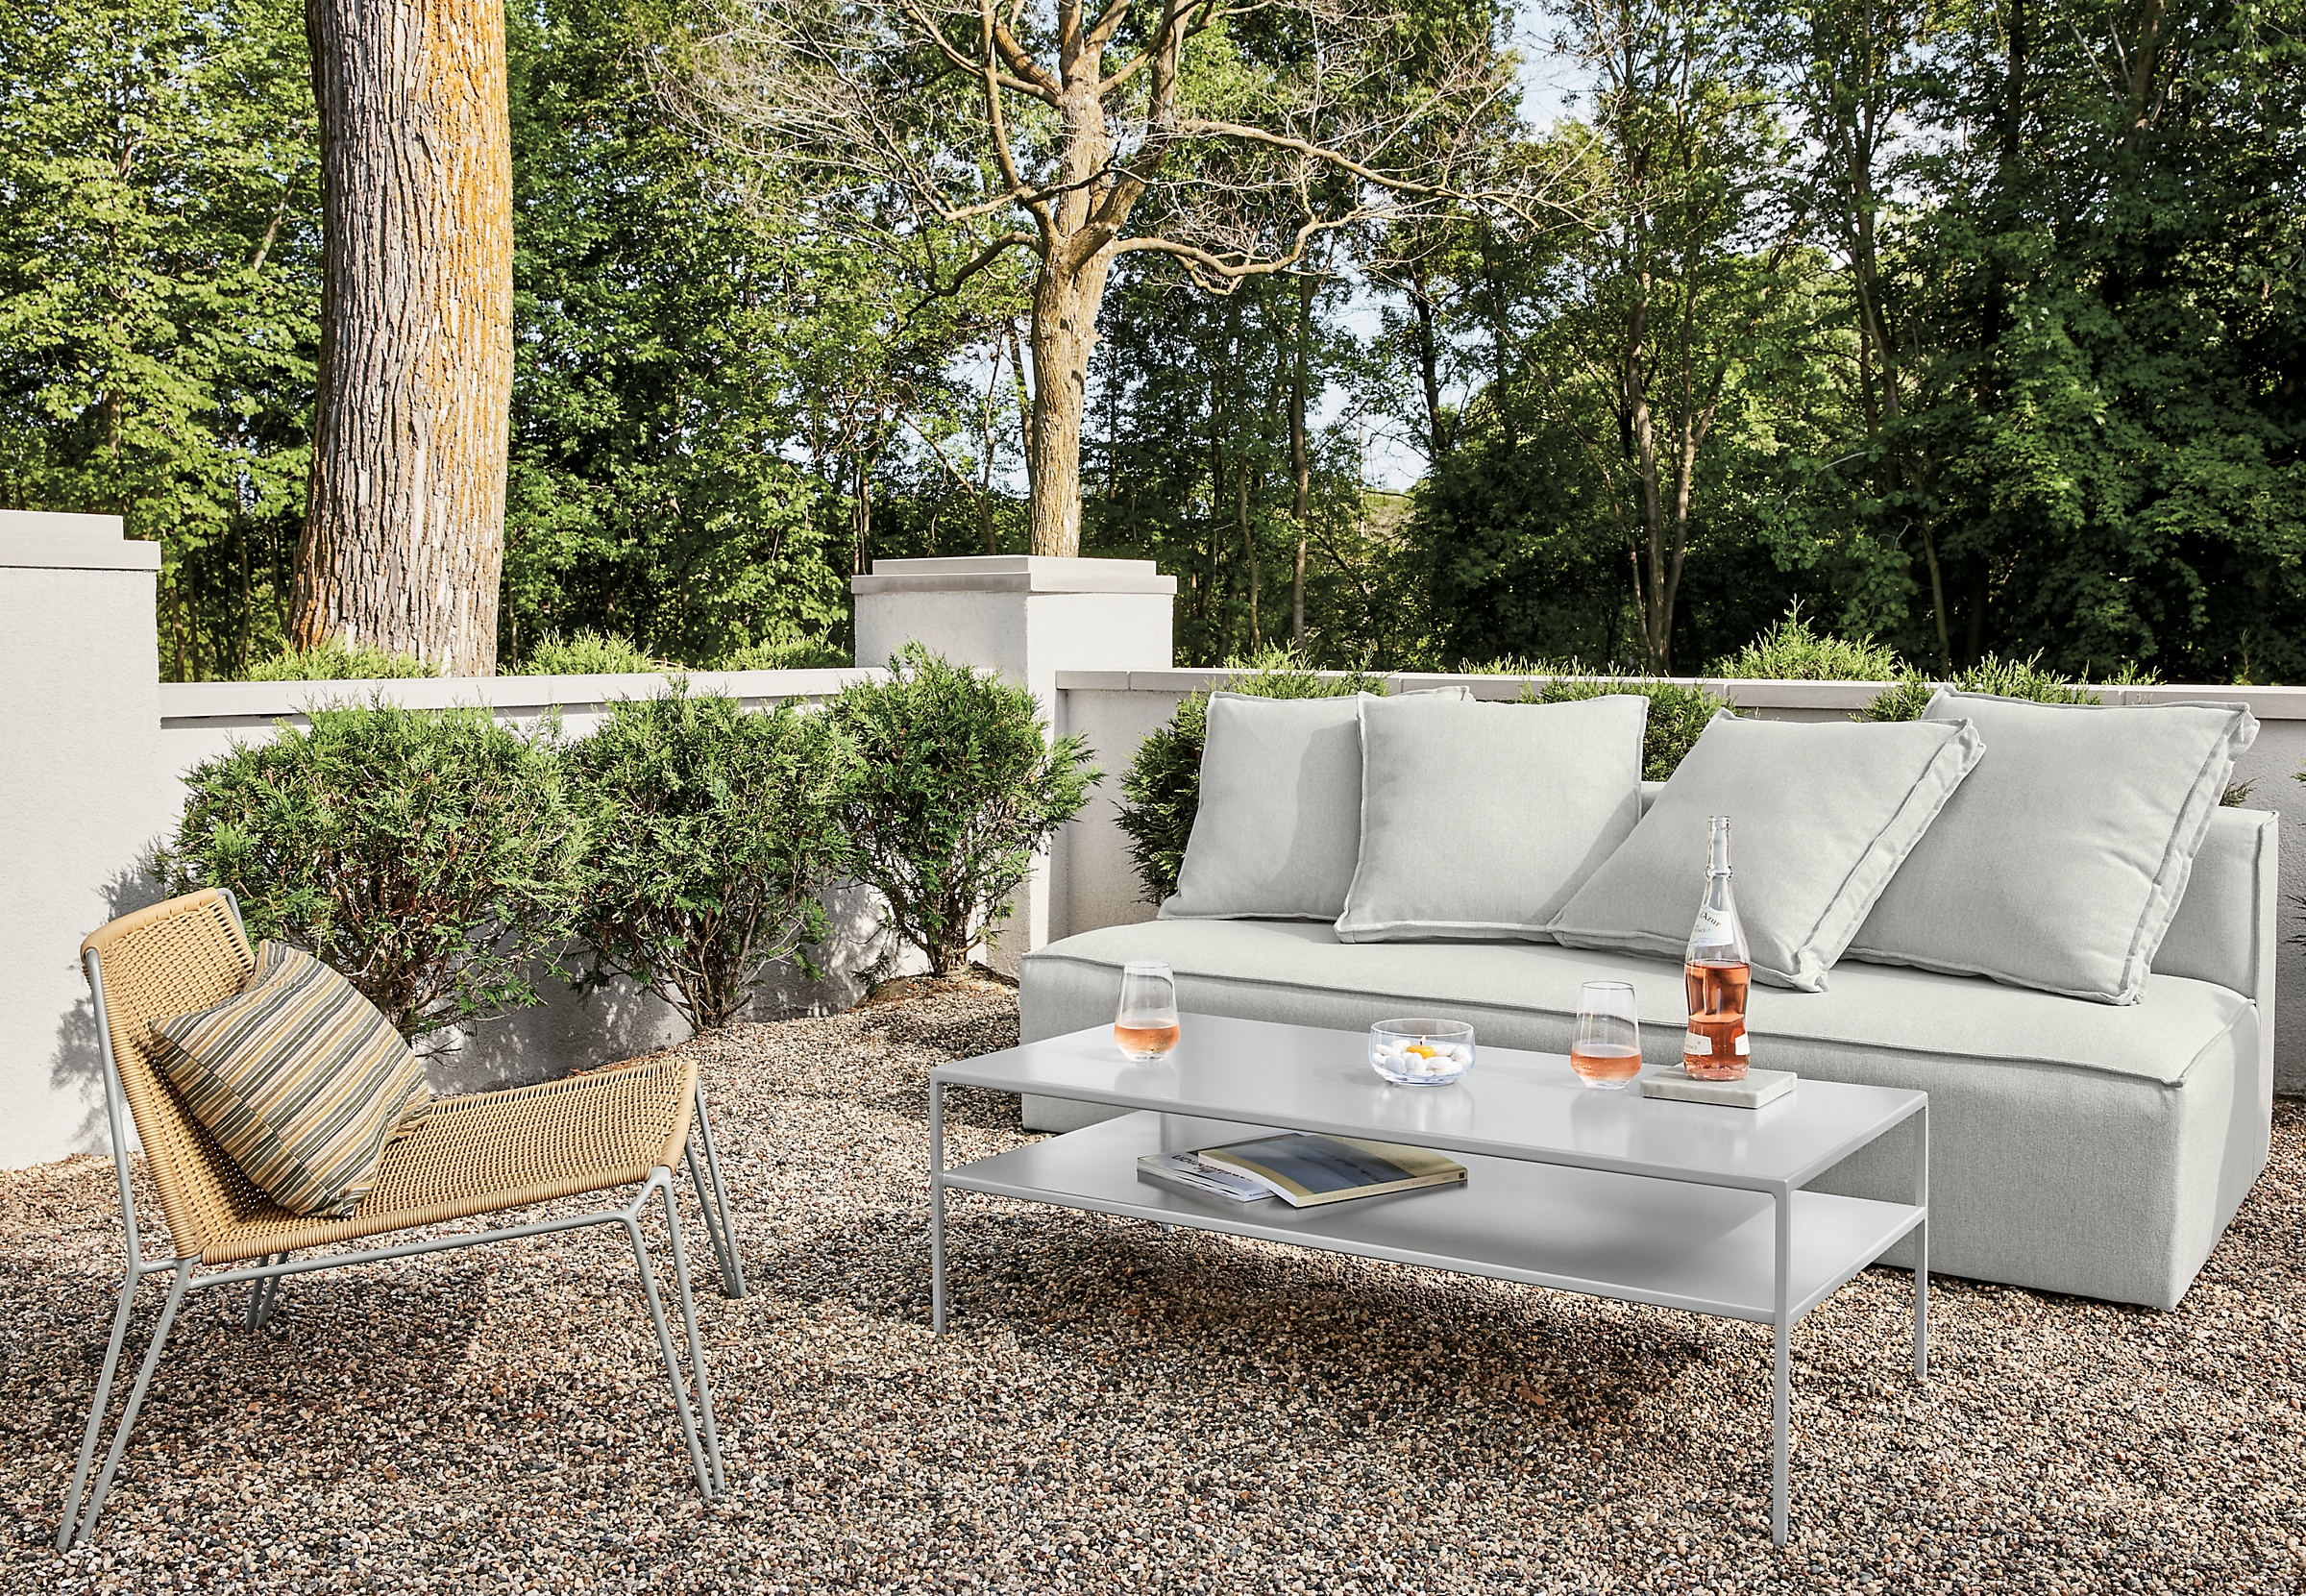 Detail of Oasis outdoor sofa in Mist grey fabric with Slim outdoor coffee table.